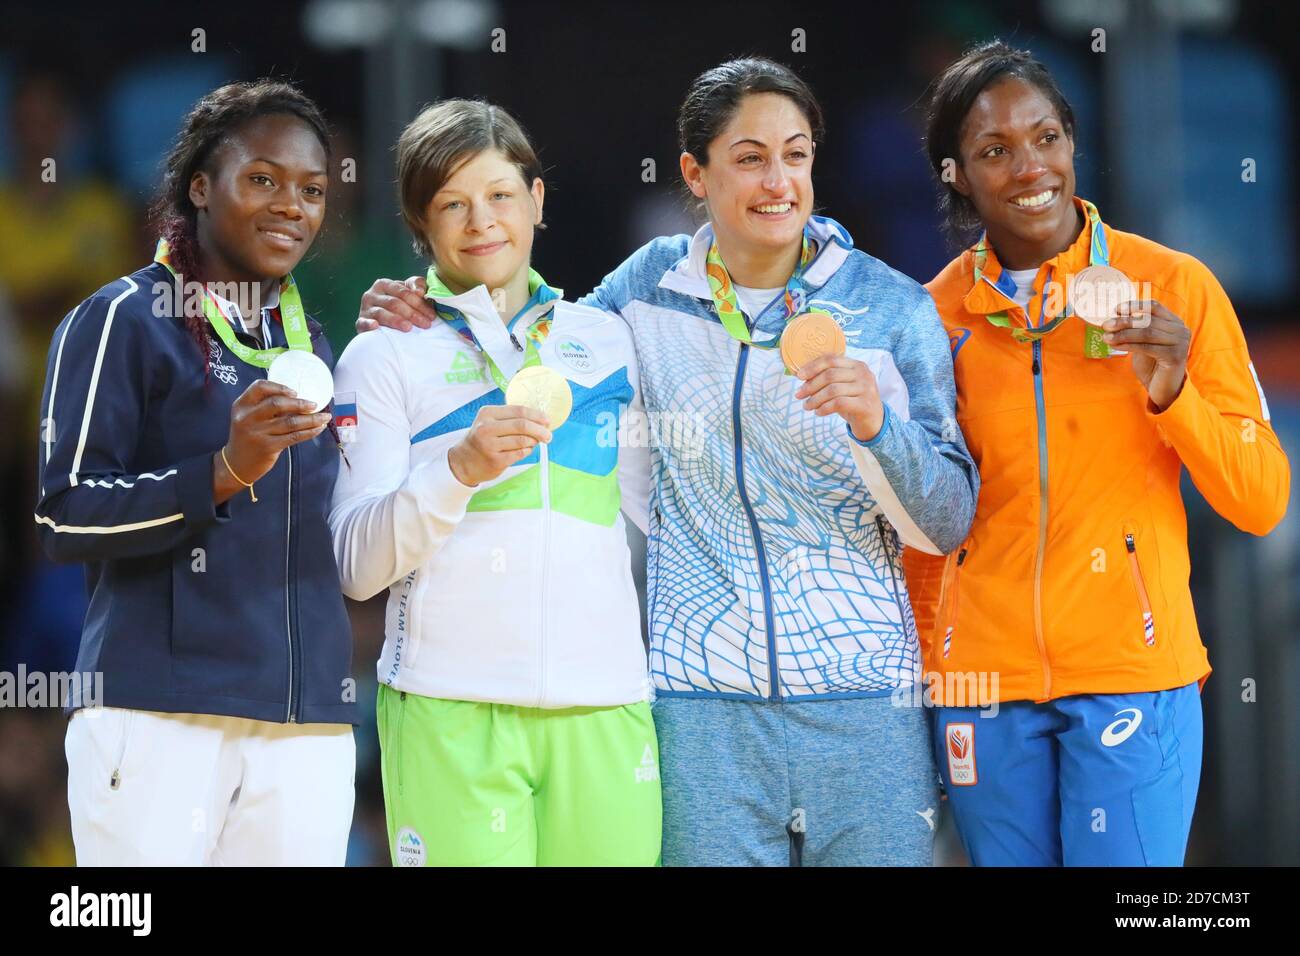 Rio de Janeiro, Brazil. 9th Aug, 2016. (L to R) Clarisse Agbegnenou (FRA), Tina Trstenjak (SLO), Yarden Gerbi (ISR), Anicka Van Emden (NED) Judo : Women's -63kg Medal Ceremony at Carioca Arena 2 during the Rio 2016 Olympic Games in Rio de Janeiro, Brazil . Credit: YUTAKA/AFLO SPORT/Alamy Live News Stock Photo